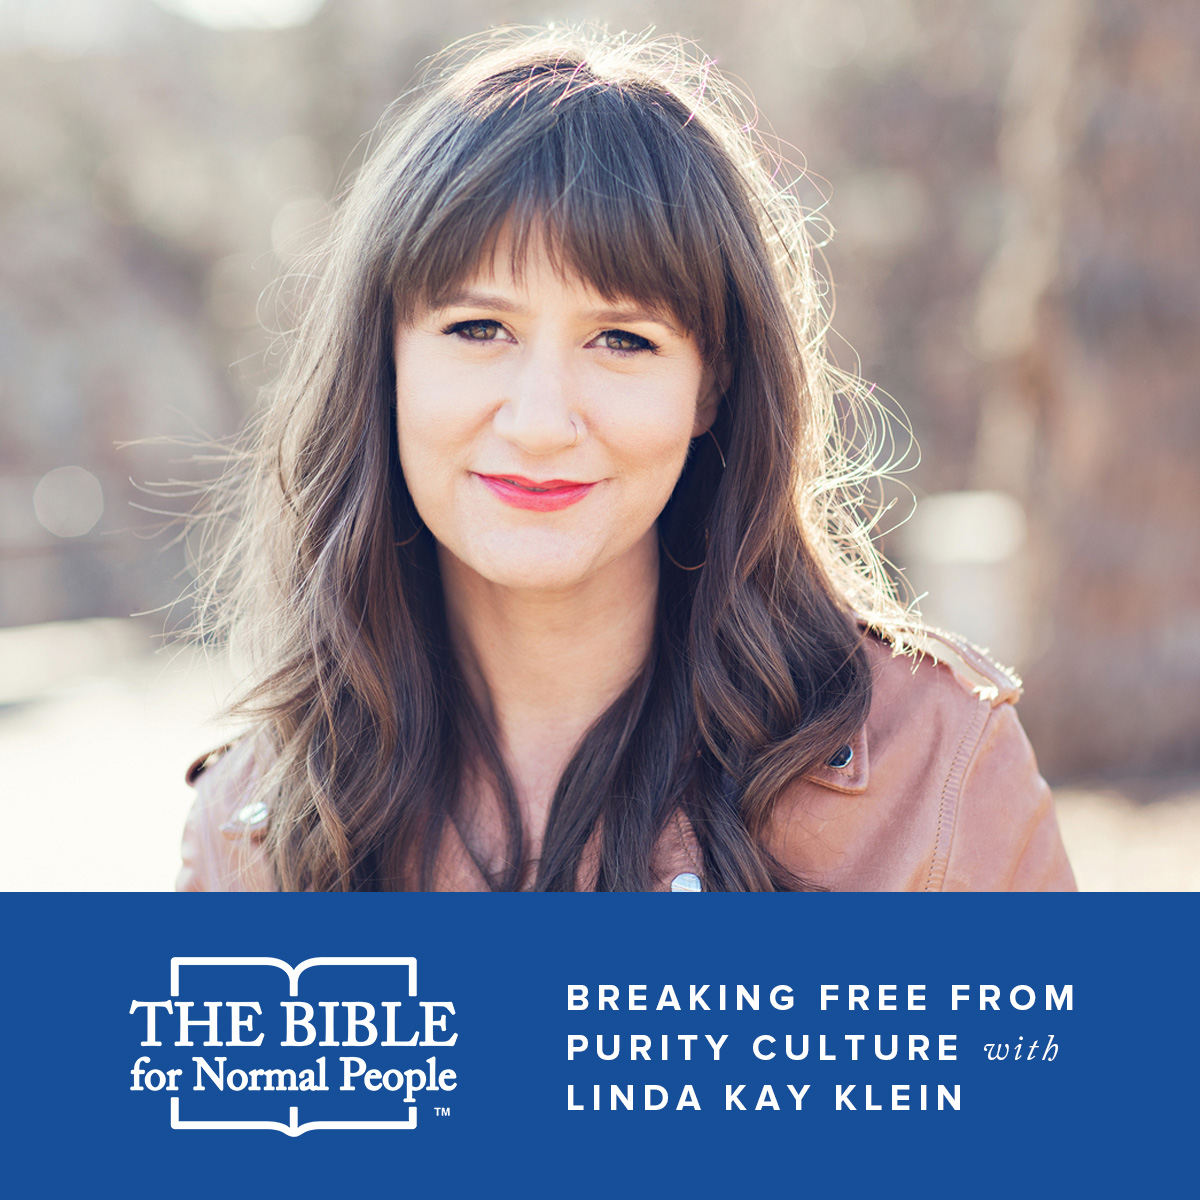 breaking free from purity culture with linda kay klein